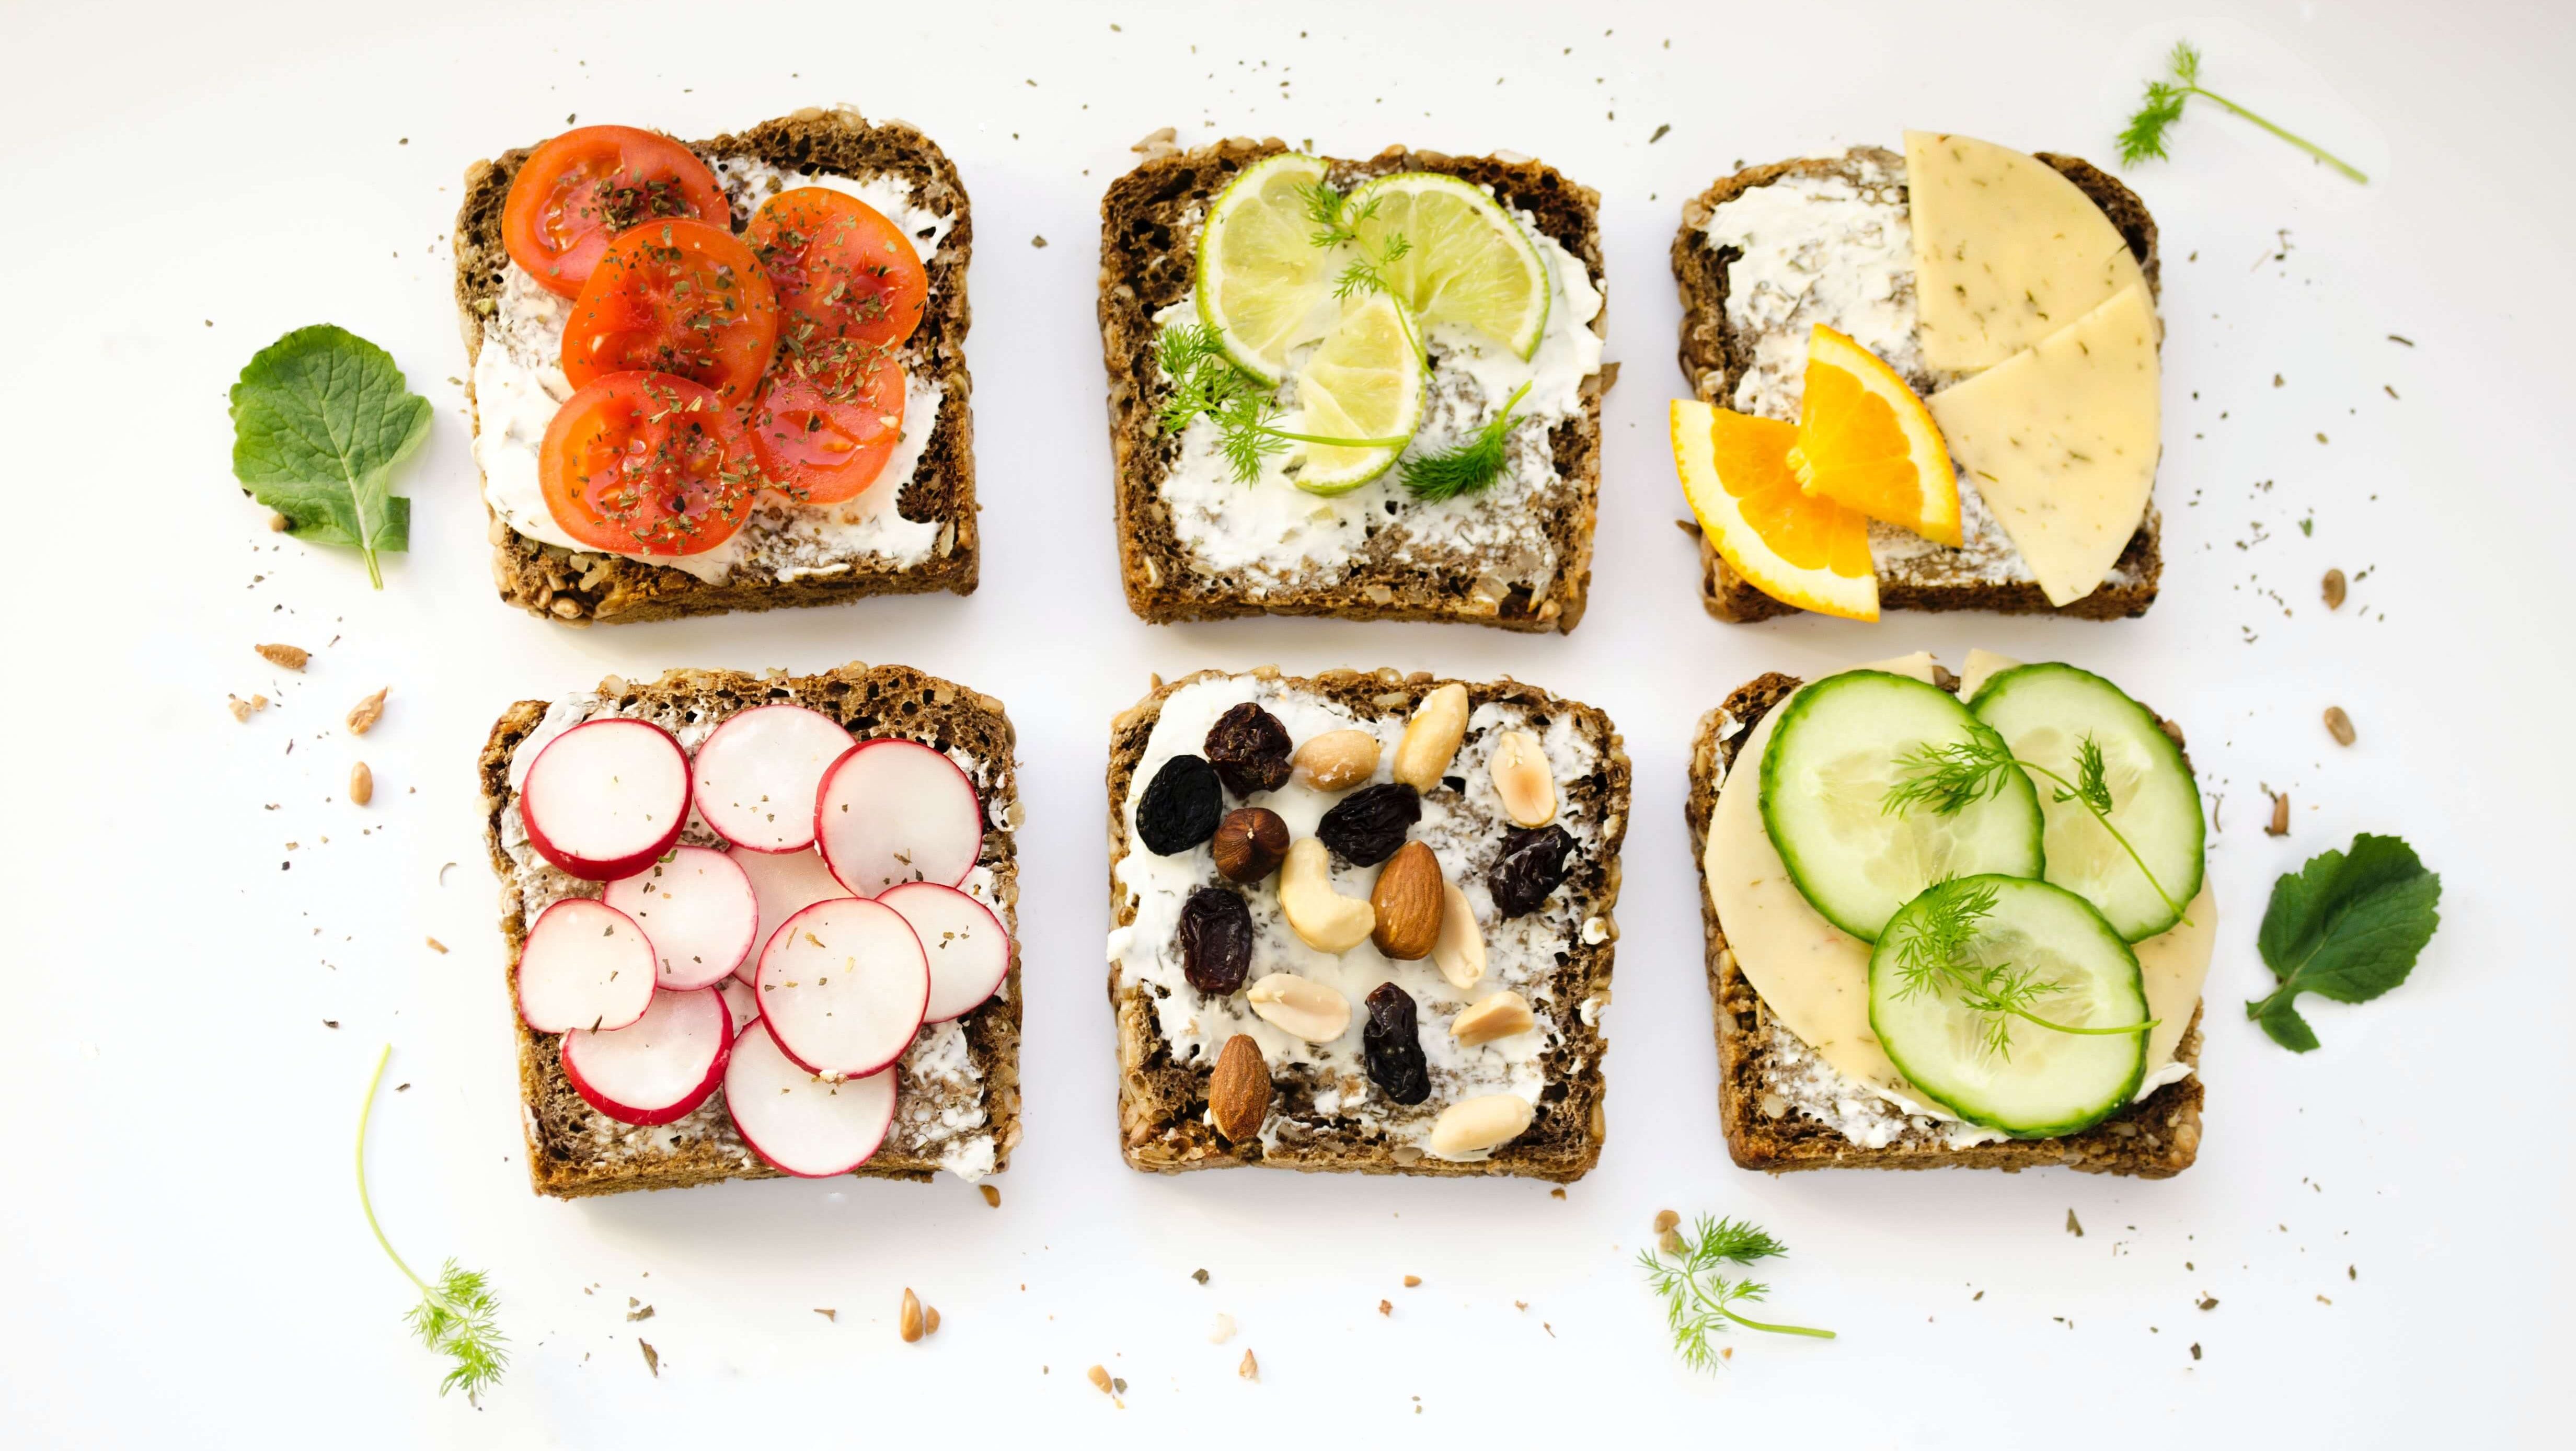 Picture depicts 6 different sandwiches made of healthy ingredients 